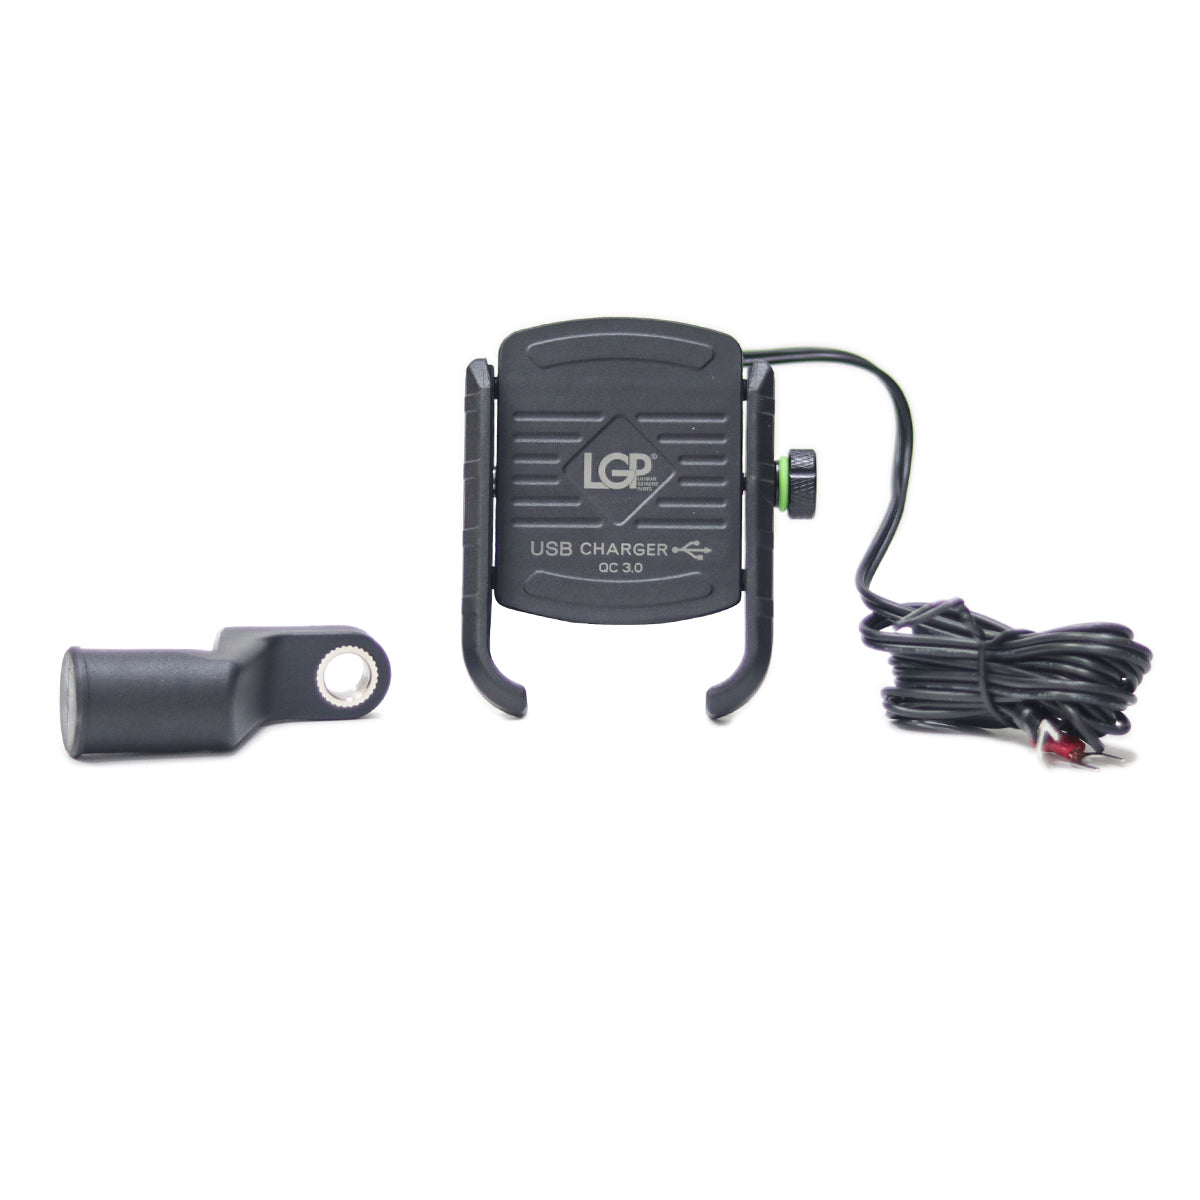 LGP MOBILE HOLDER WITH CHARGER